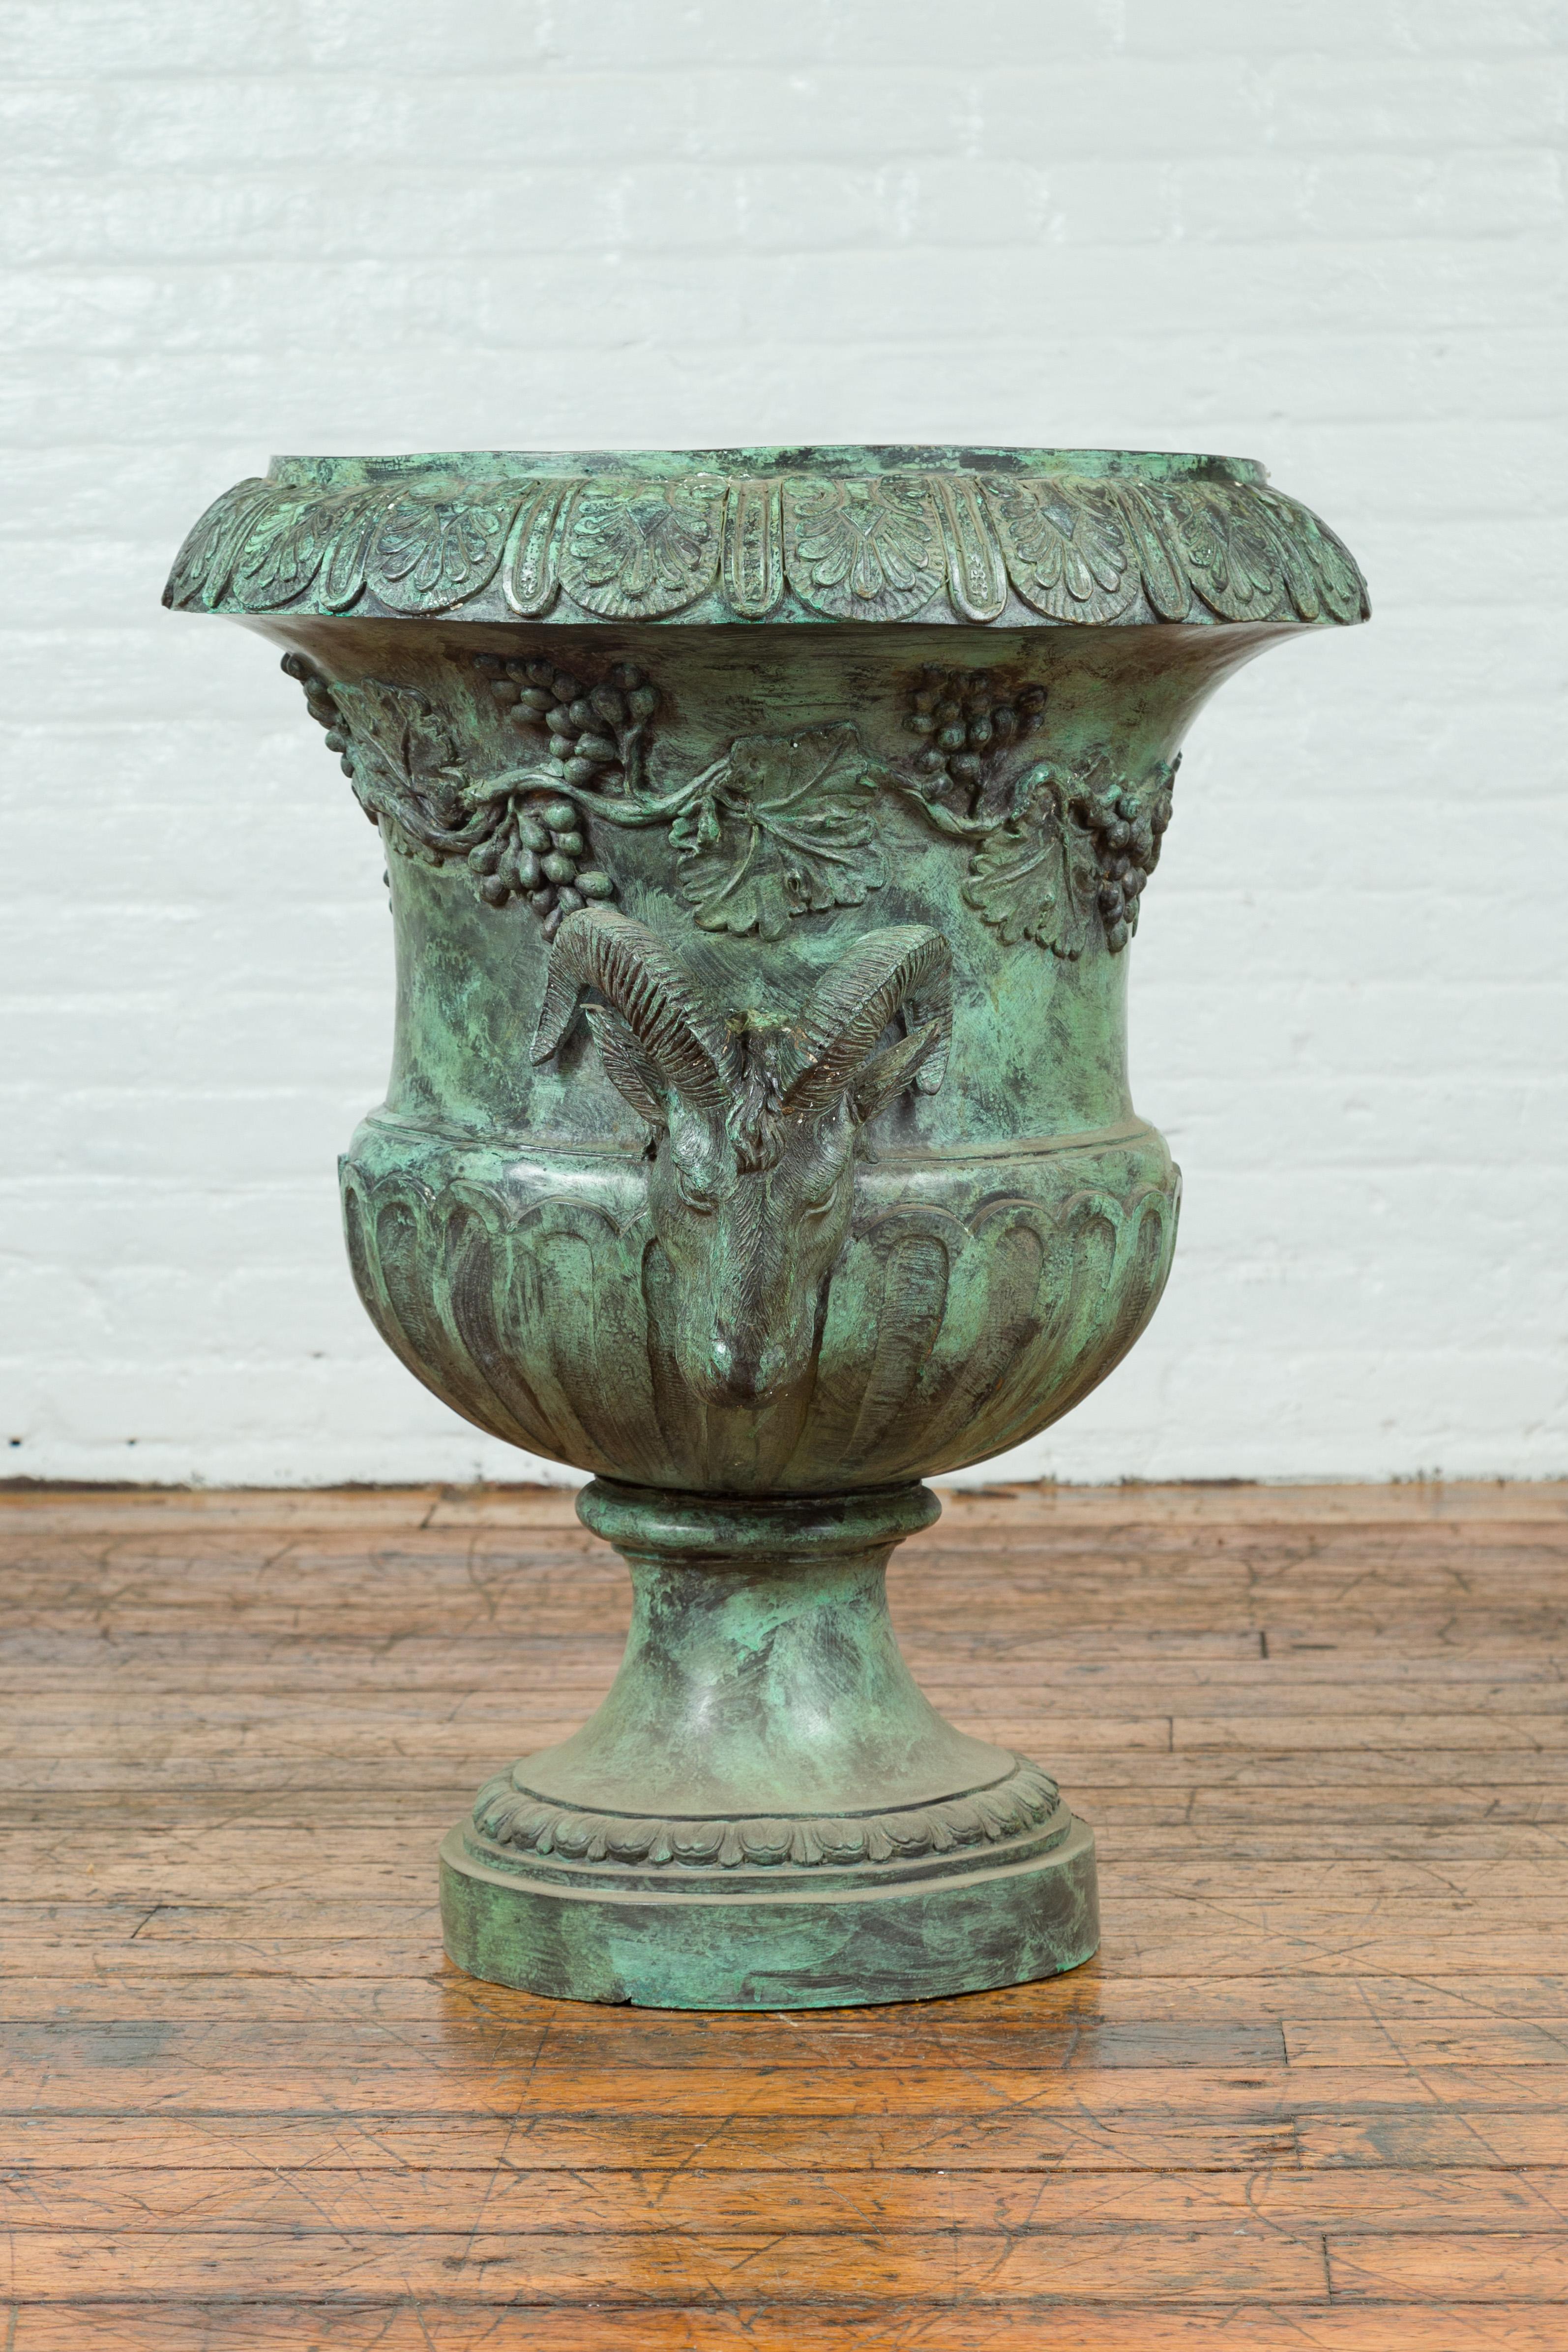 Large Classical Roman Style Bronze Urn Planter with Verde Patina and Rams Heads For Sale 6